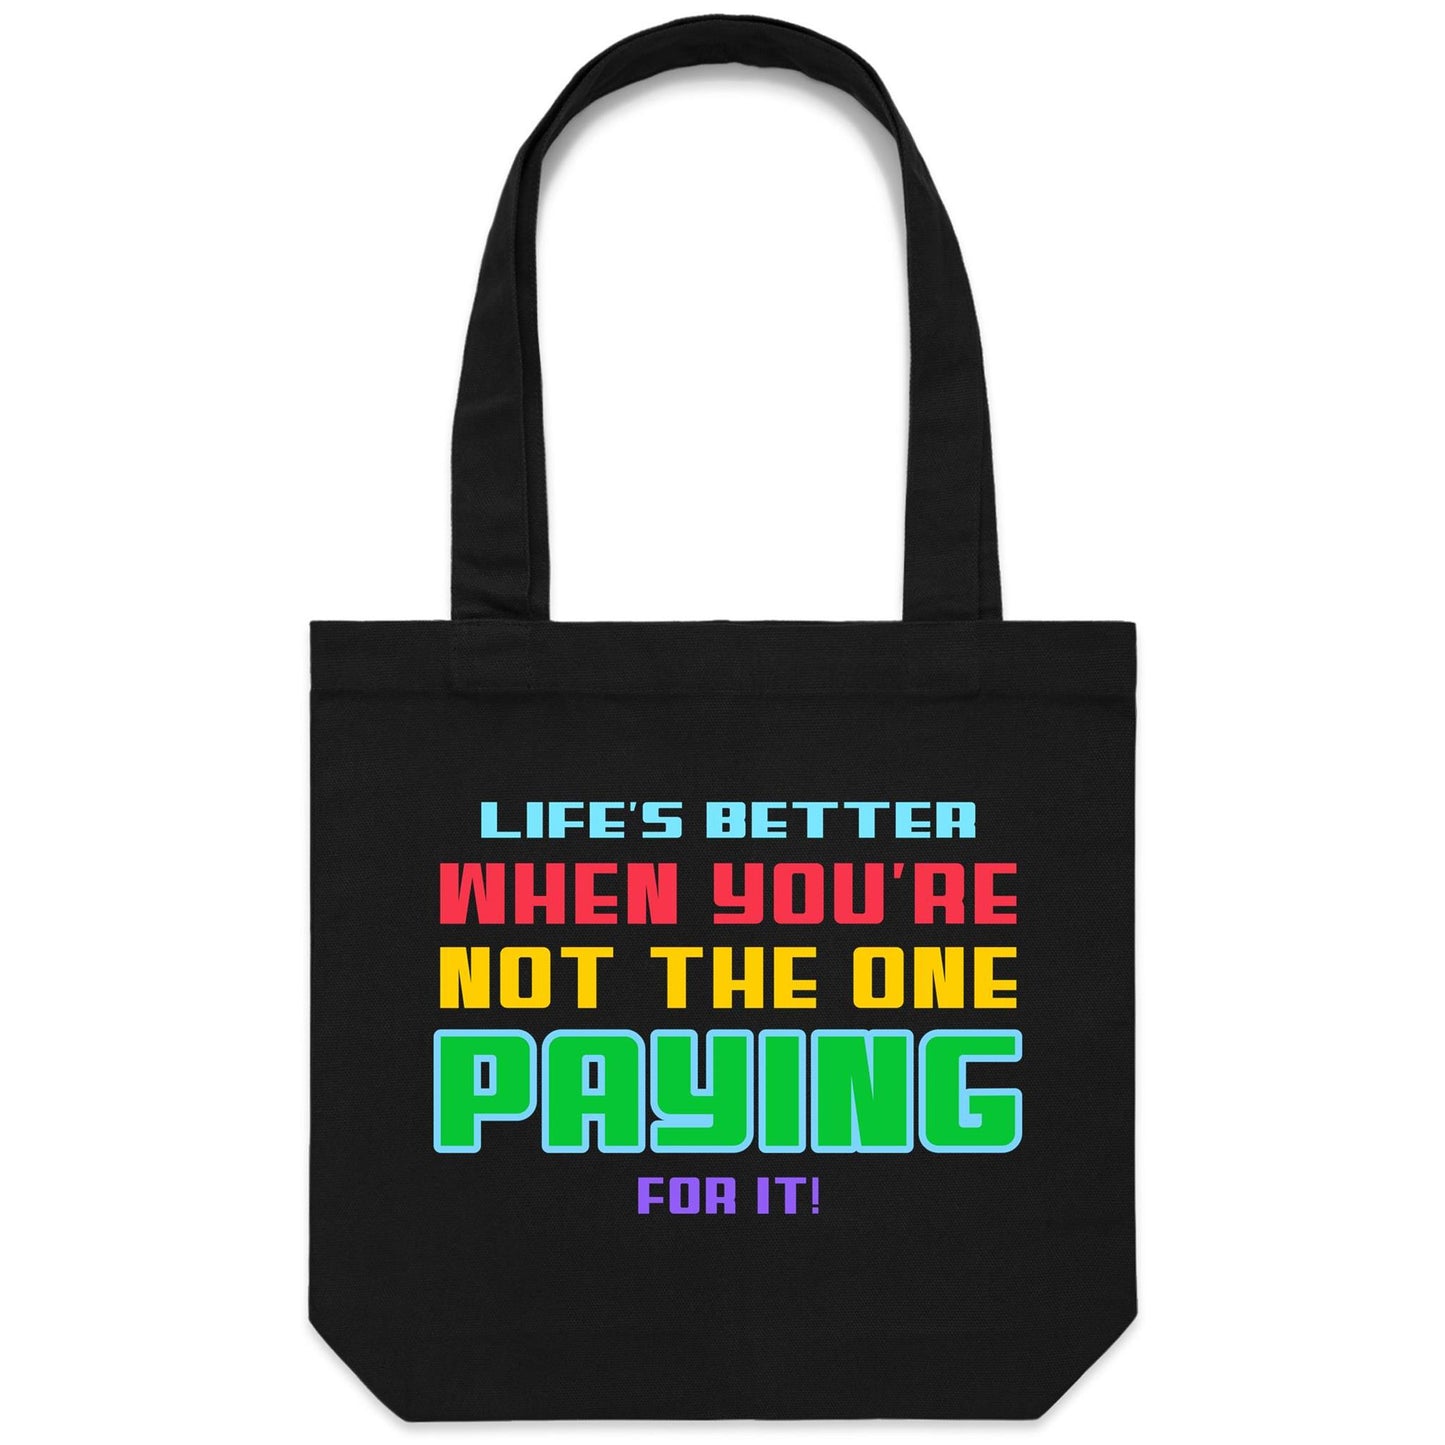 Life's Better - Canvas Tote Bag Black One-Size Tote Bag kids